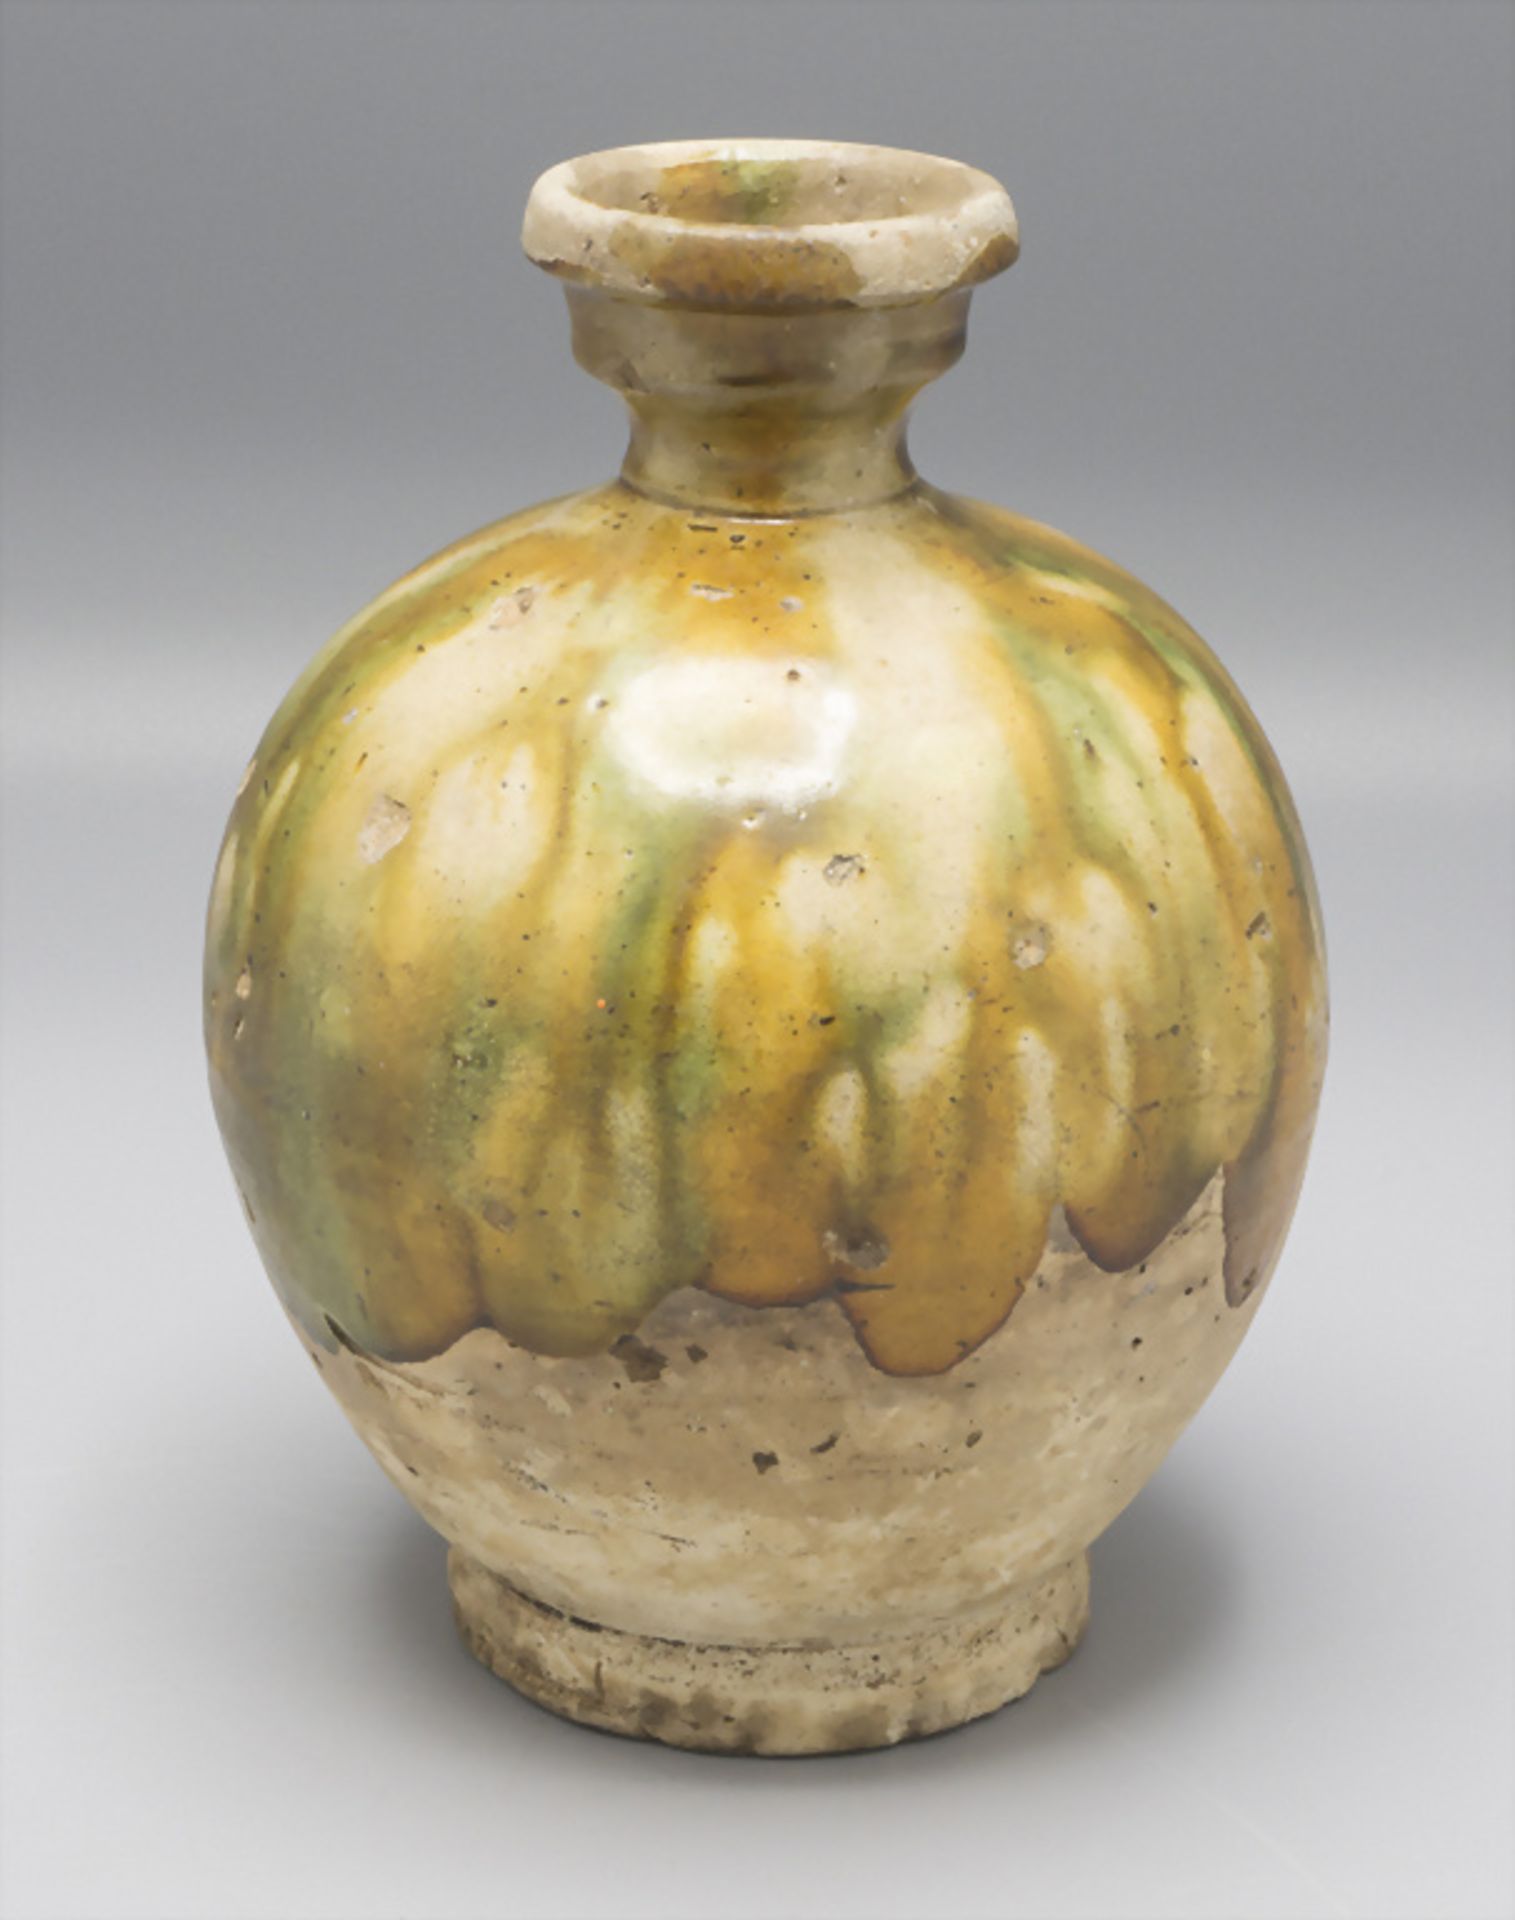 Ziervase / A decorative vase, China, Tang Dynastie (618-907)